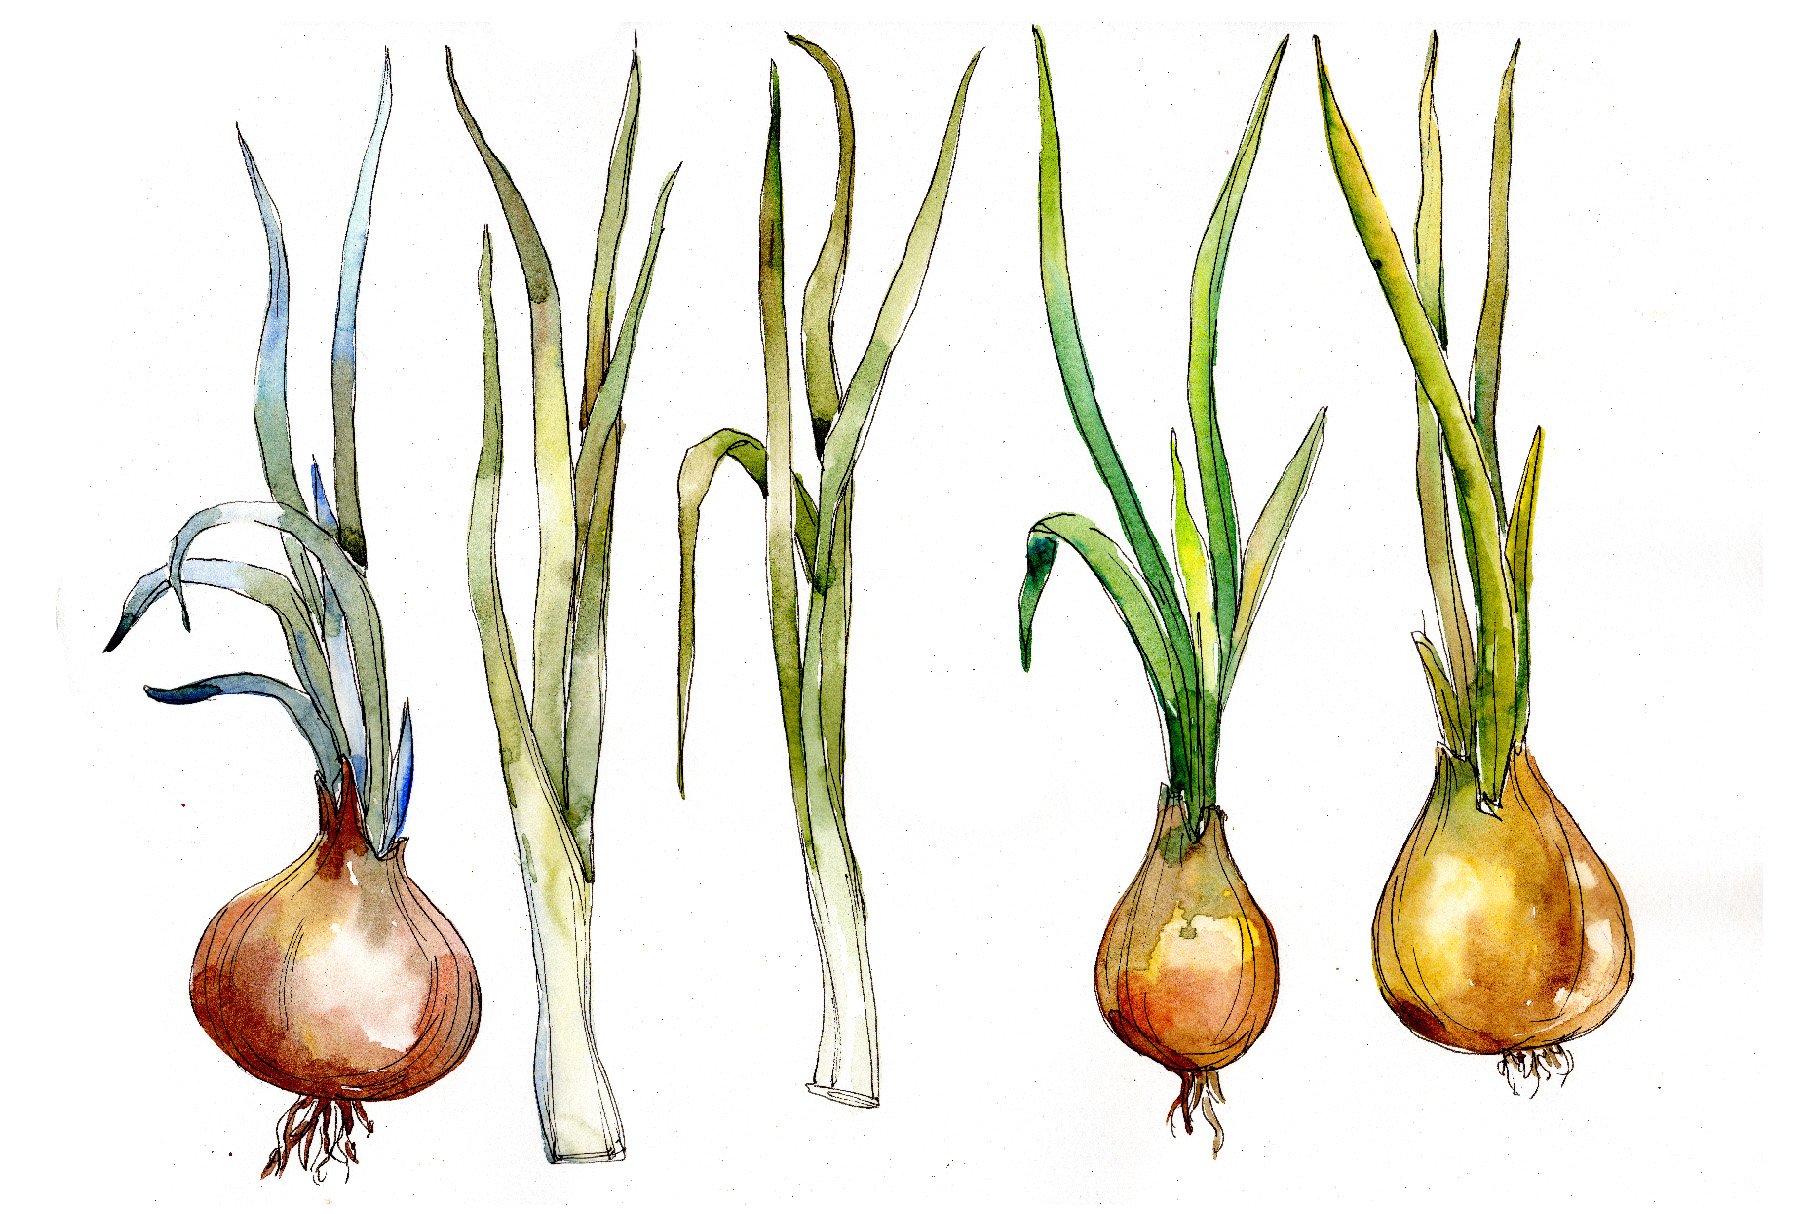 Diverse of onions.